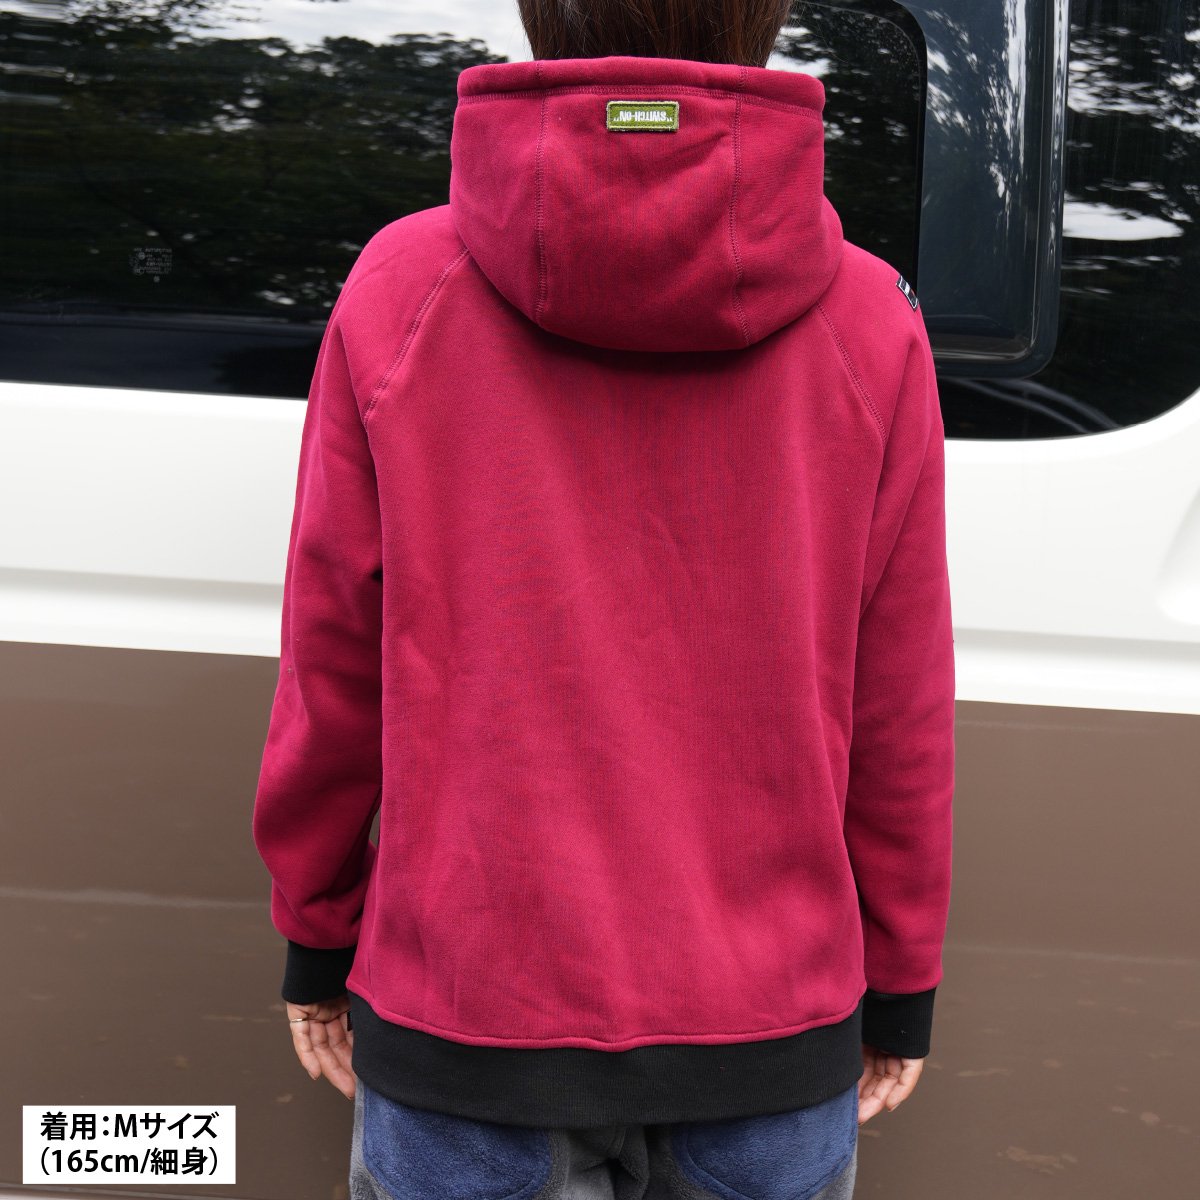 3A Pullover hoodie